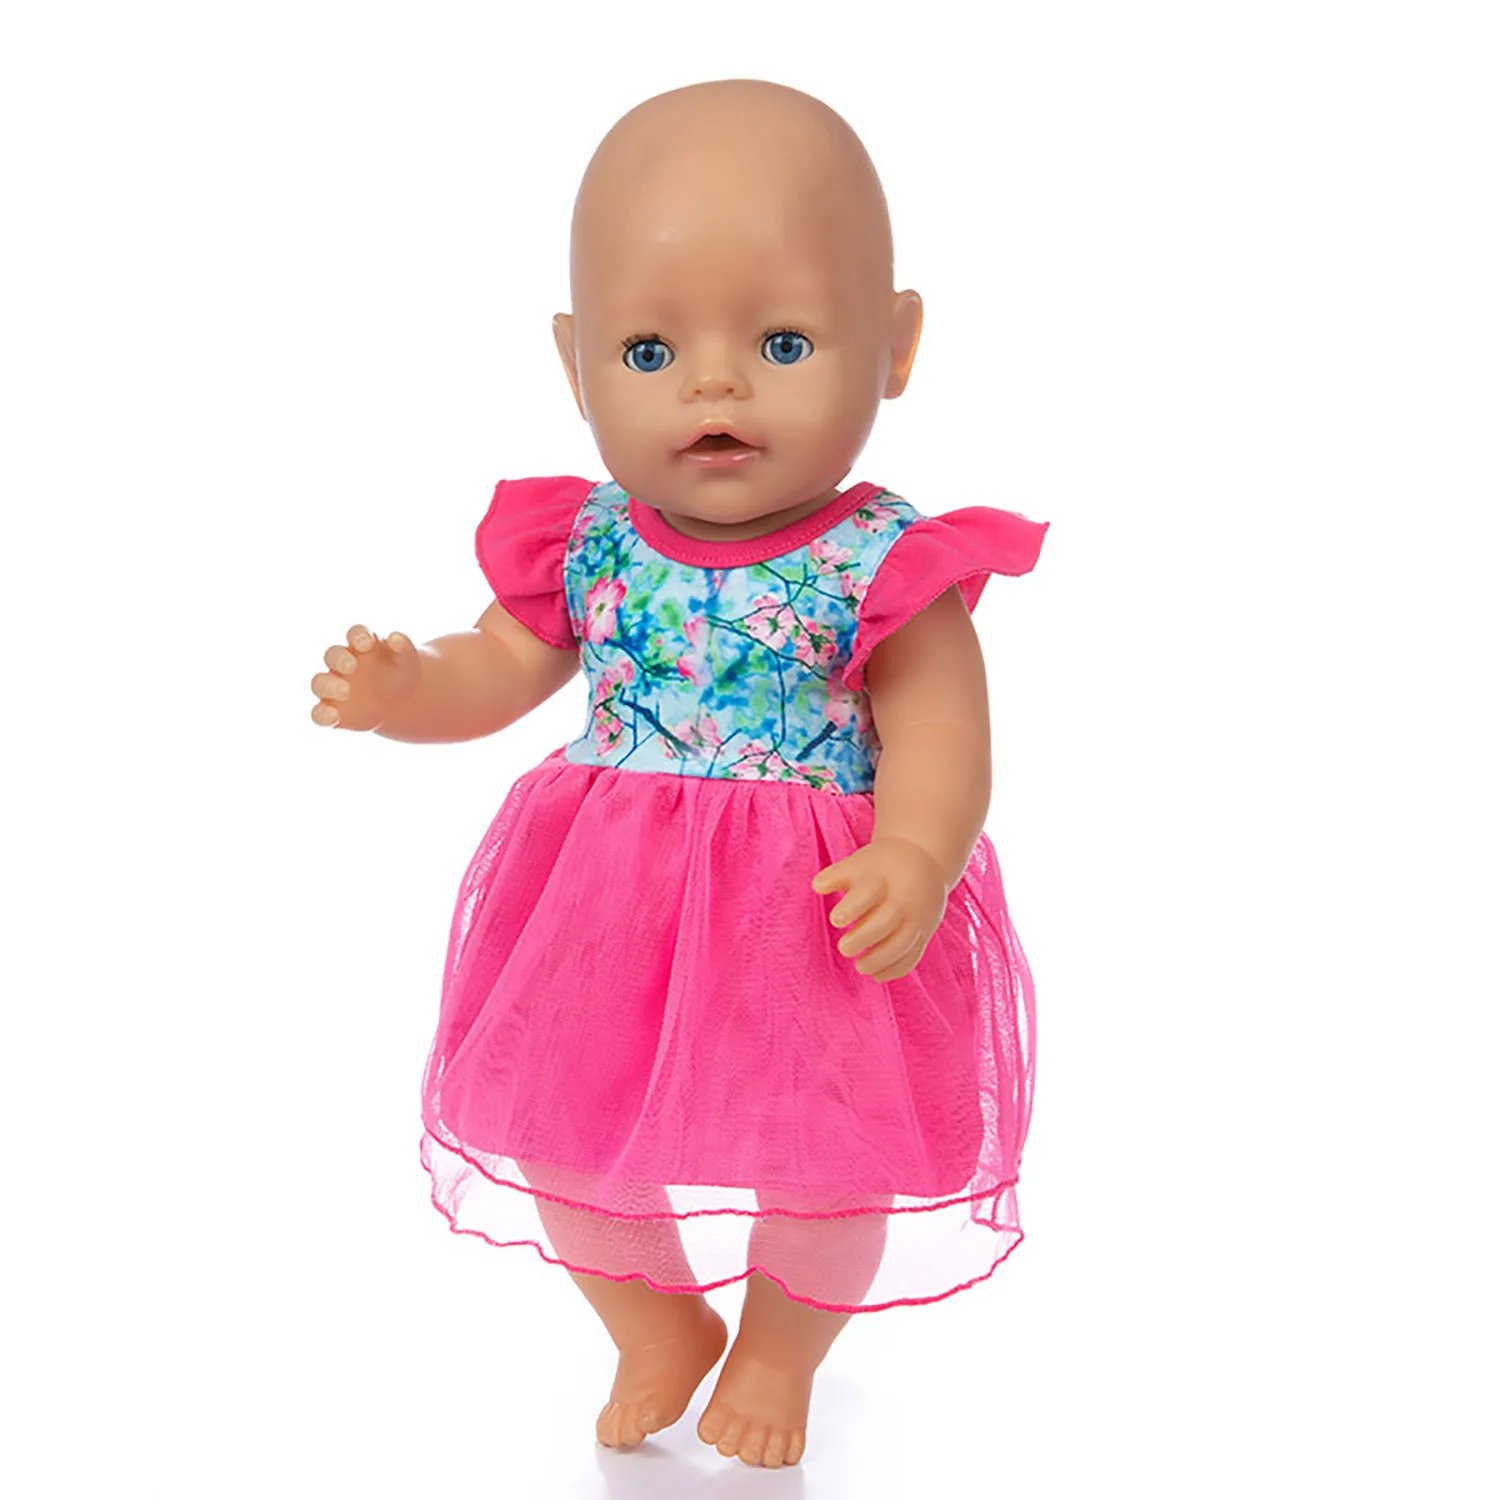 

Baby New Born Fit 17 inch 43cm Doll Clothes Accessories Pink Flared Yarn Skirt Suit For Baby Birthday Gift